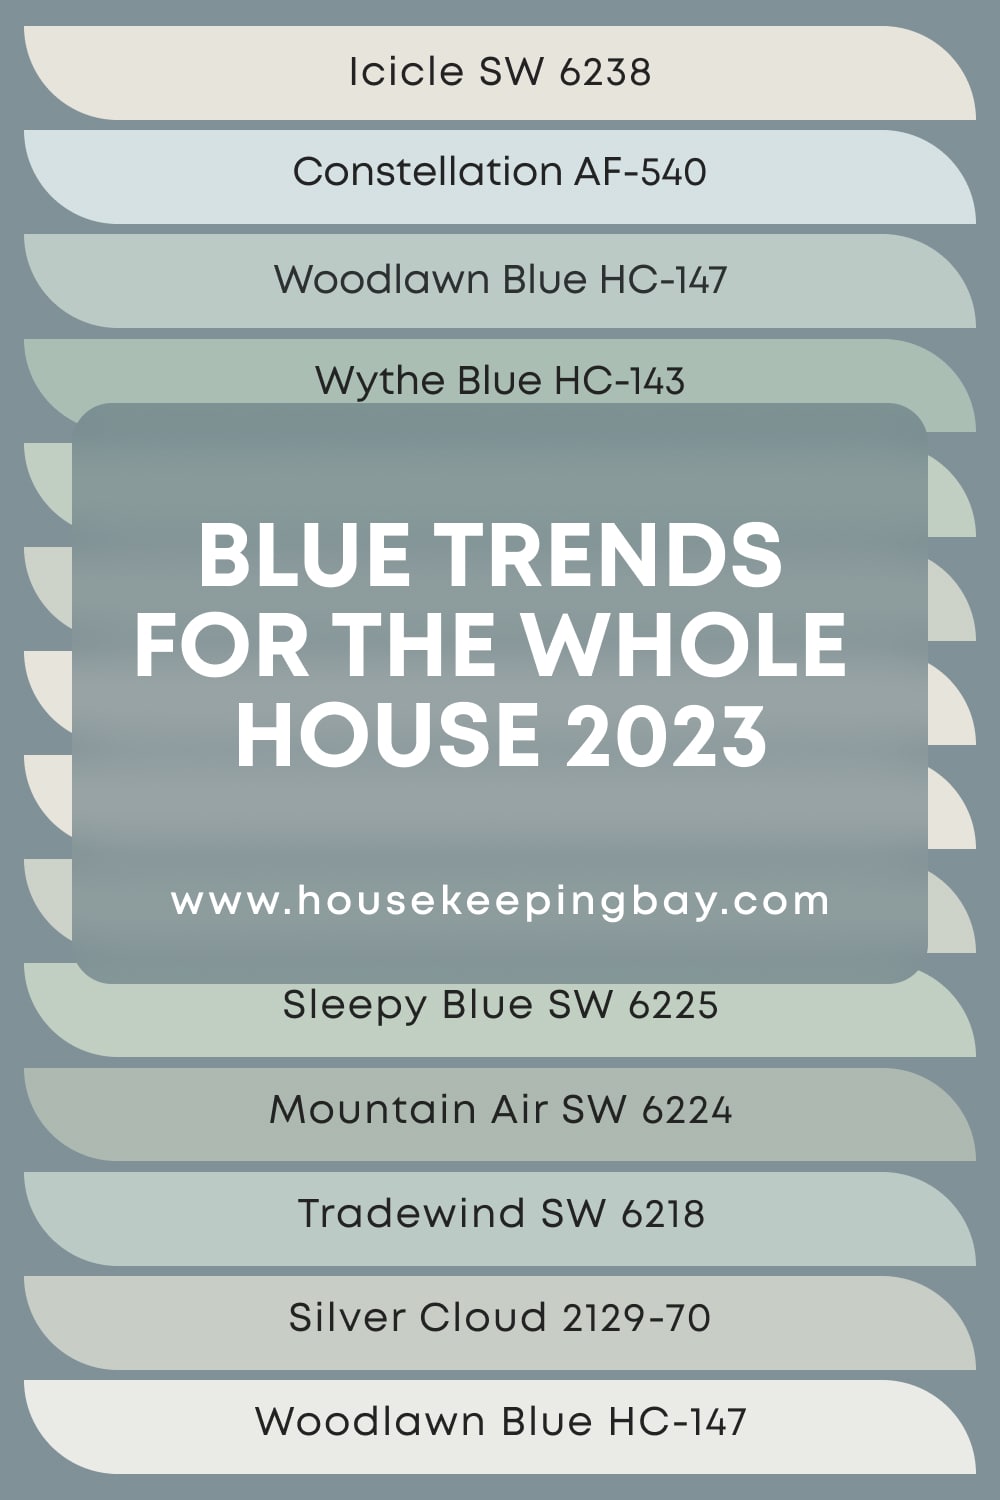 Blue Trends For the House 2023